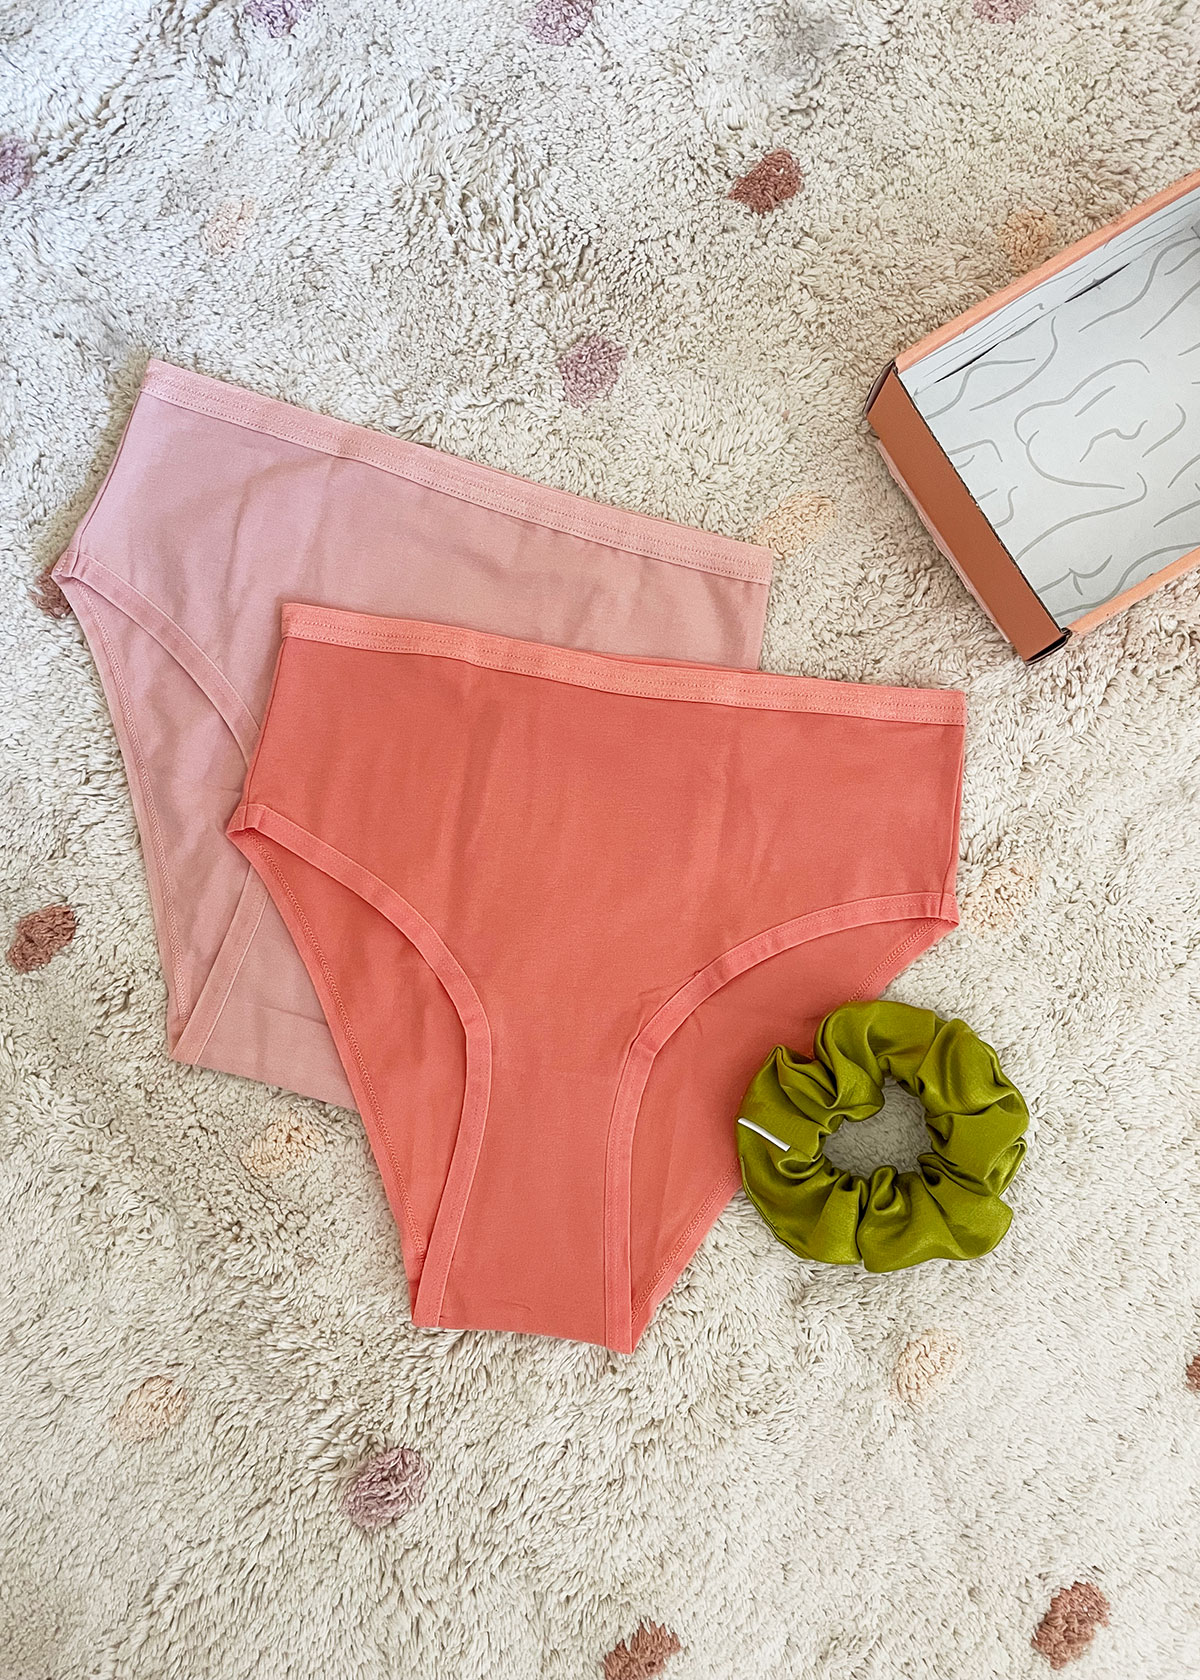 Hara The Label - Sustainable & Ethical Underwear Review